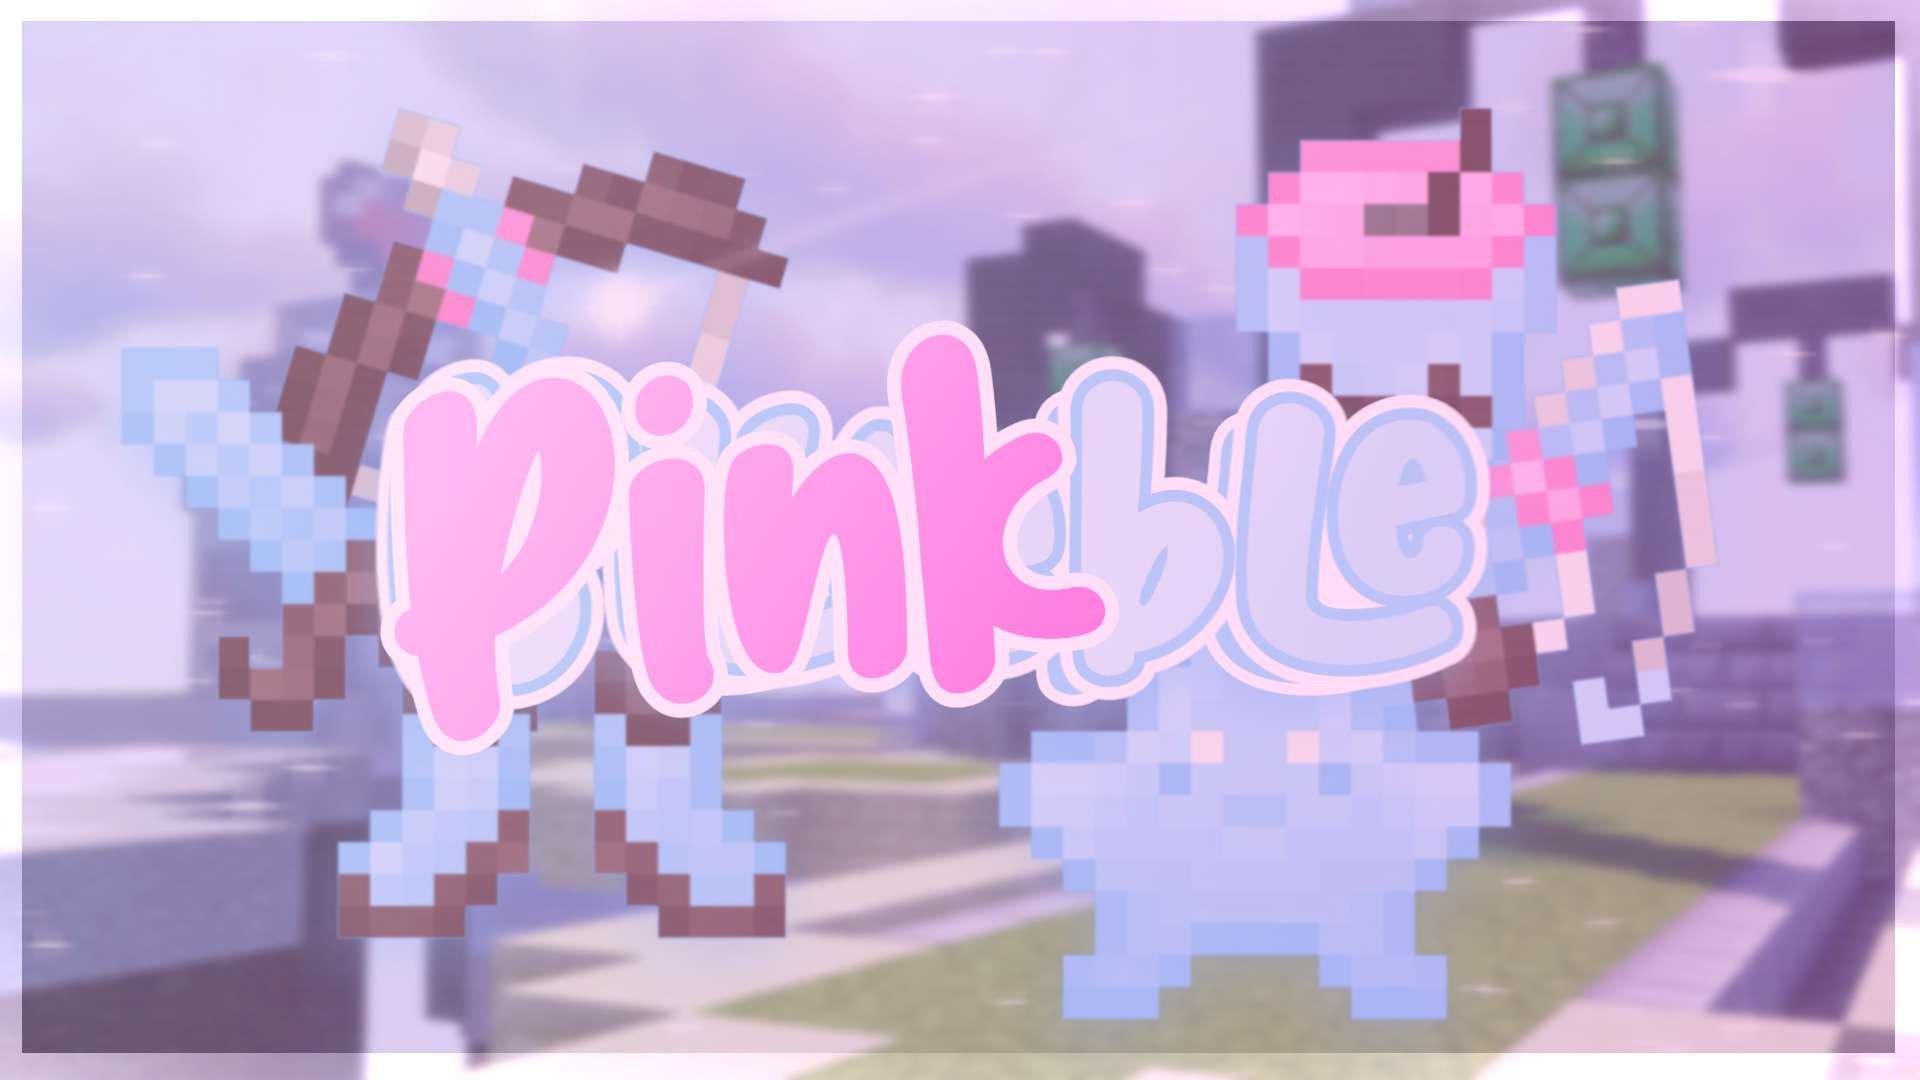 Pinkble 16x by Juuliet on PvPRP